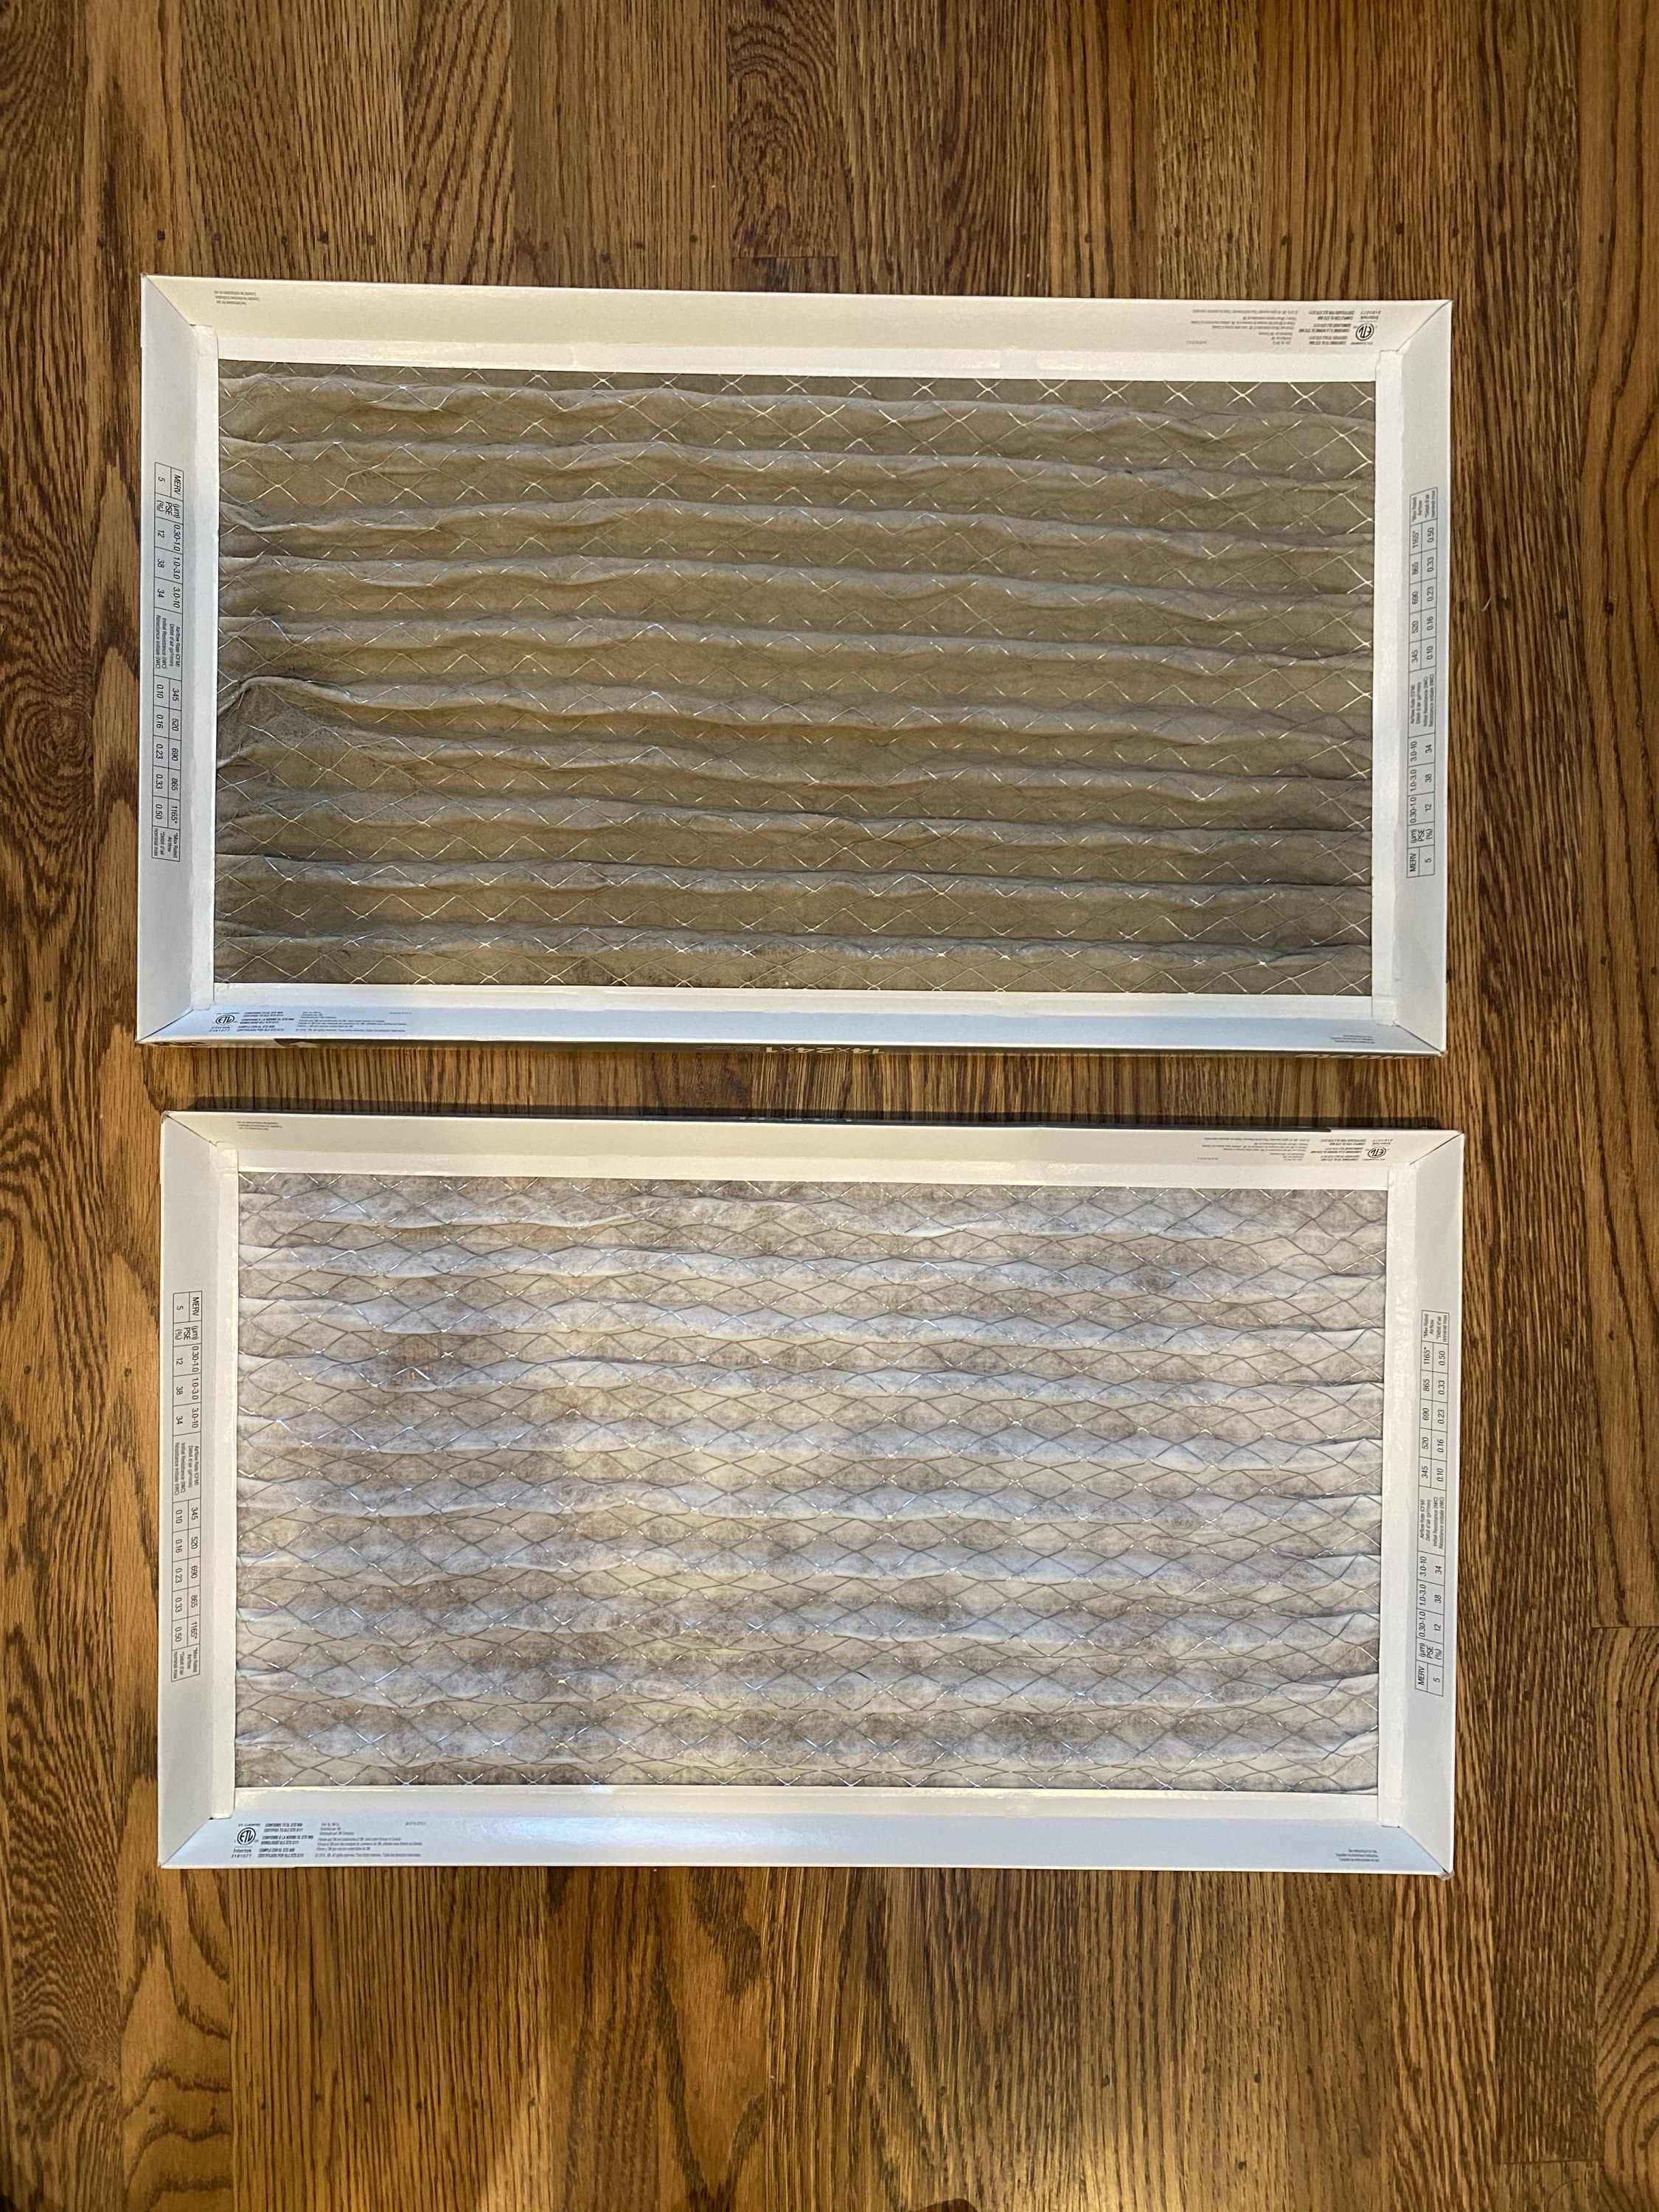 Our old MERV 5 cold air return filter on top vs a new MERV 13 below.